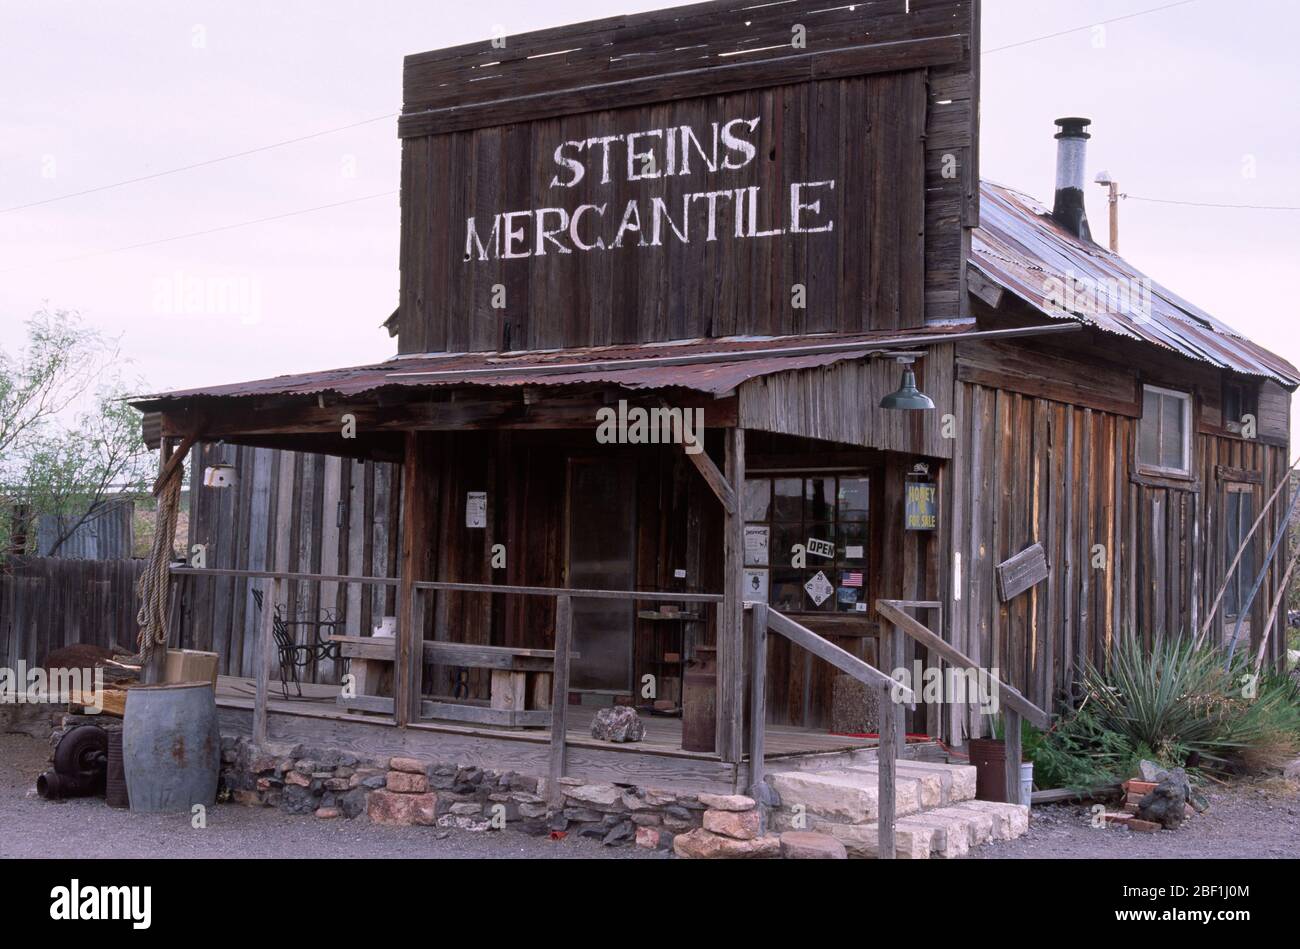 Mercantile, Steins Ghost Town, New Mexico Stock Photo